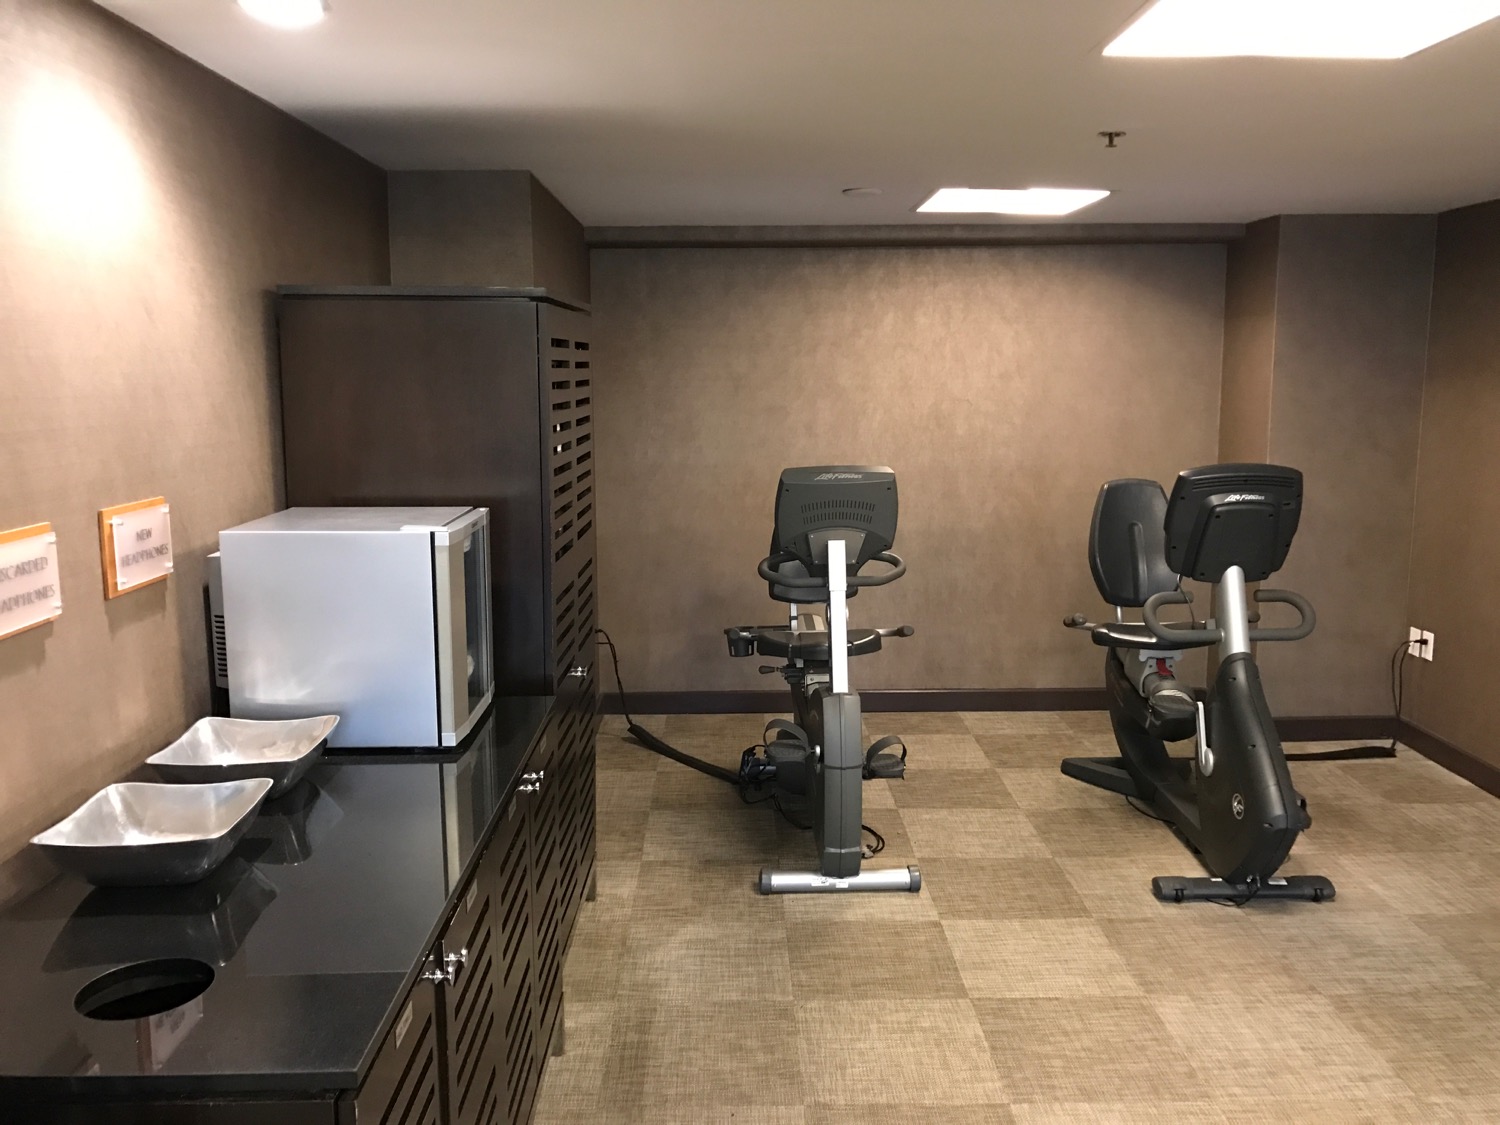 a room with exercise bikes and a microwave